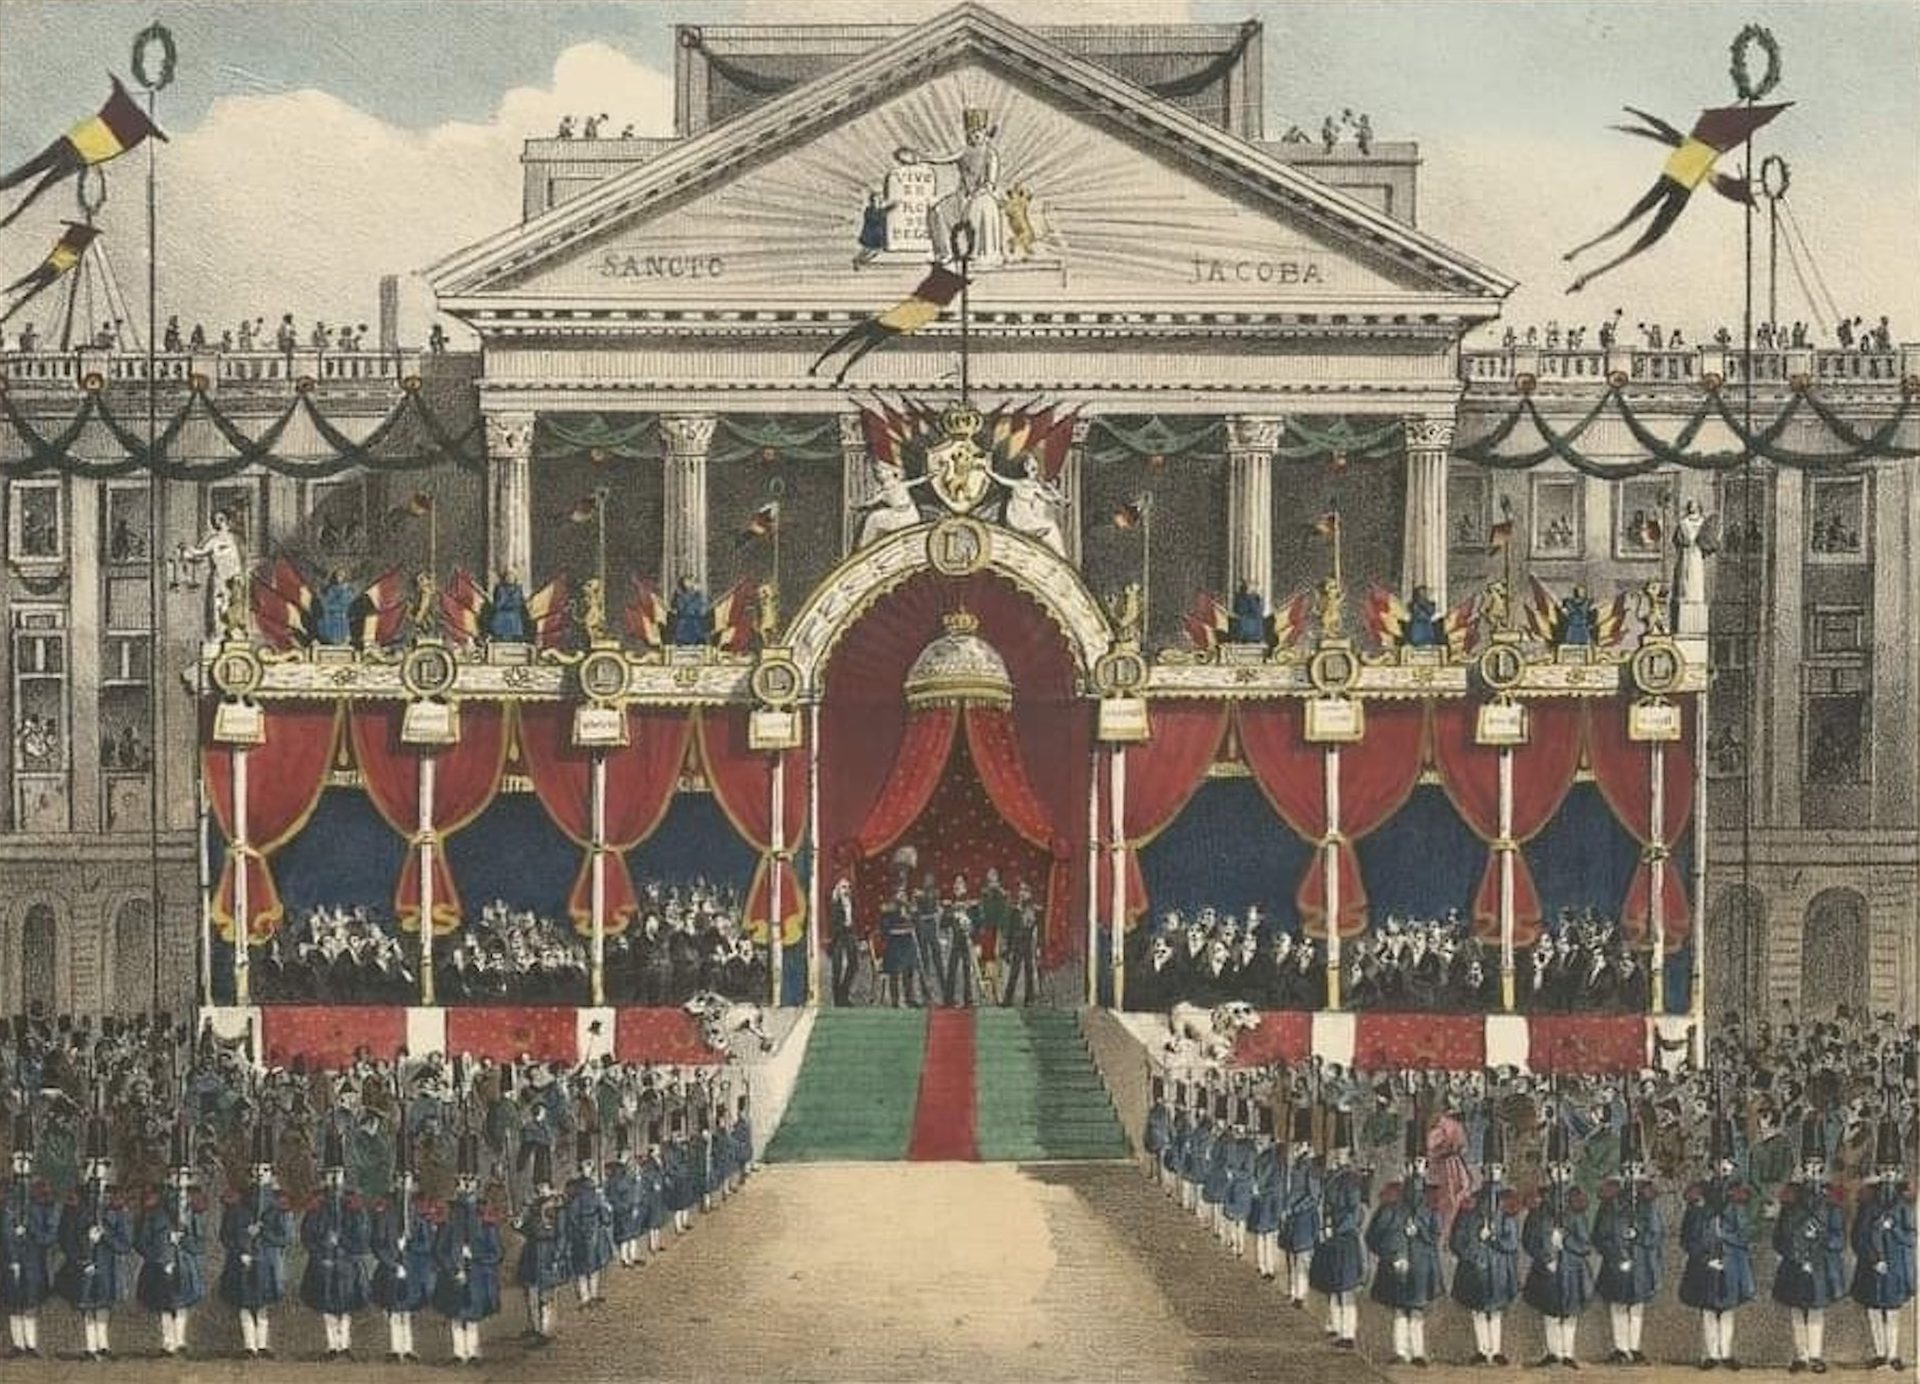 Today in History: The first King of Belgium is crowned in Brussels